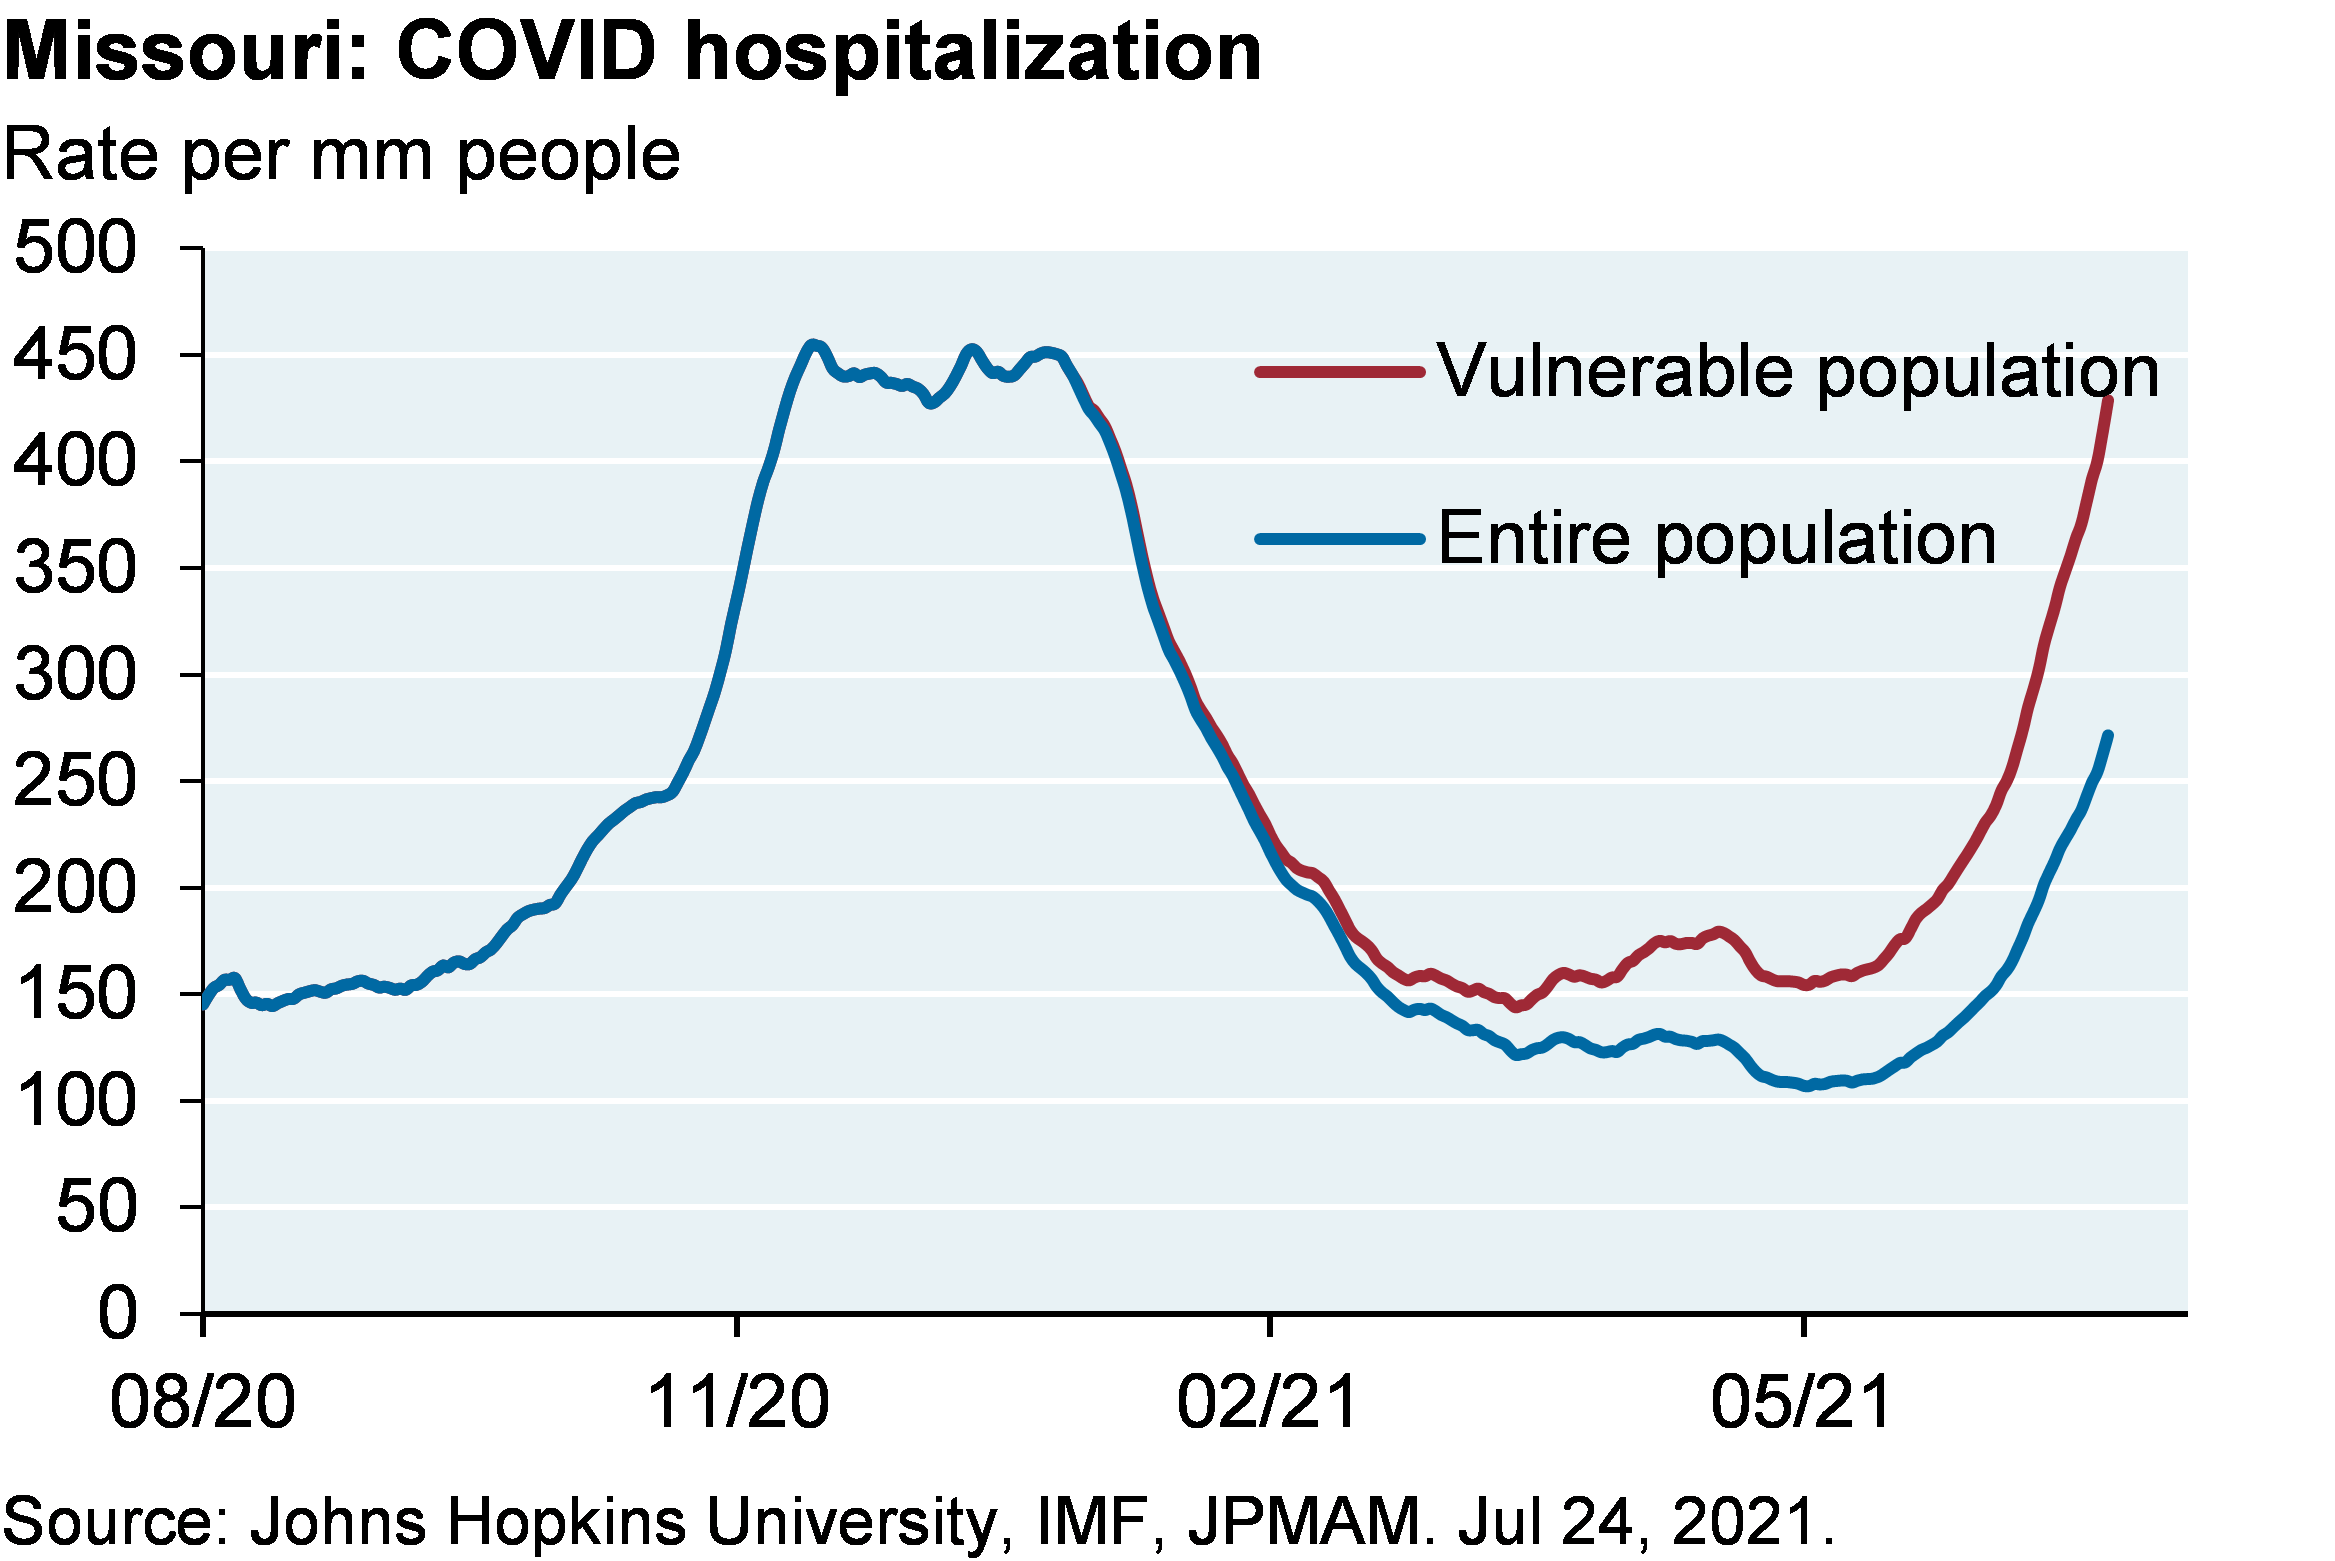 Line chart shows COVID hospitalizations in Missouri for the vulnerable population compared to the entire population, shown as the hospitalization rate per million people. Hospitalizations for the entire population are around 250 per million compared to almost 450 per million among the vulnerable population, which is in line with the winter peak of around 450 per million. 